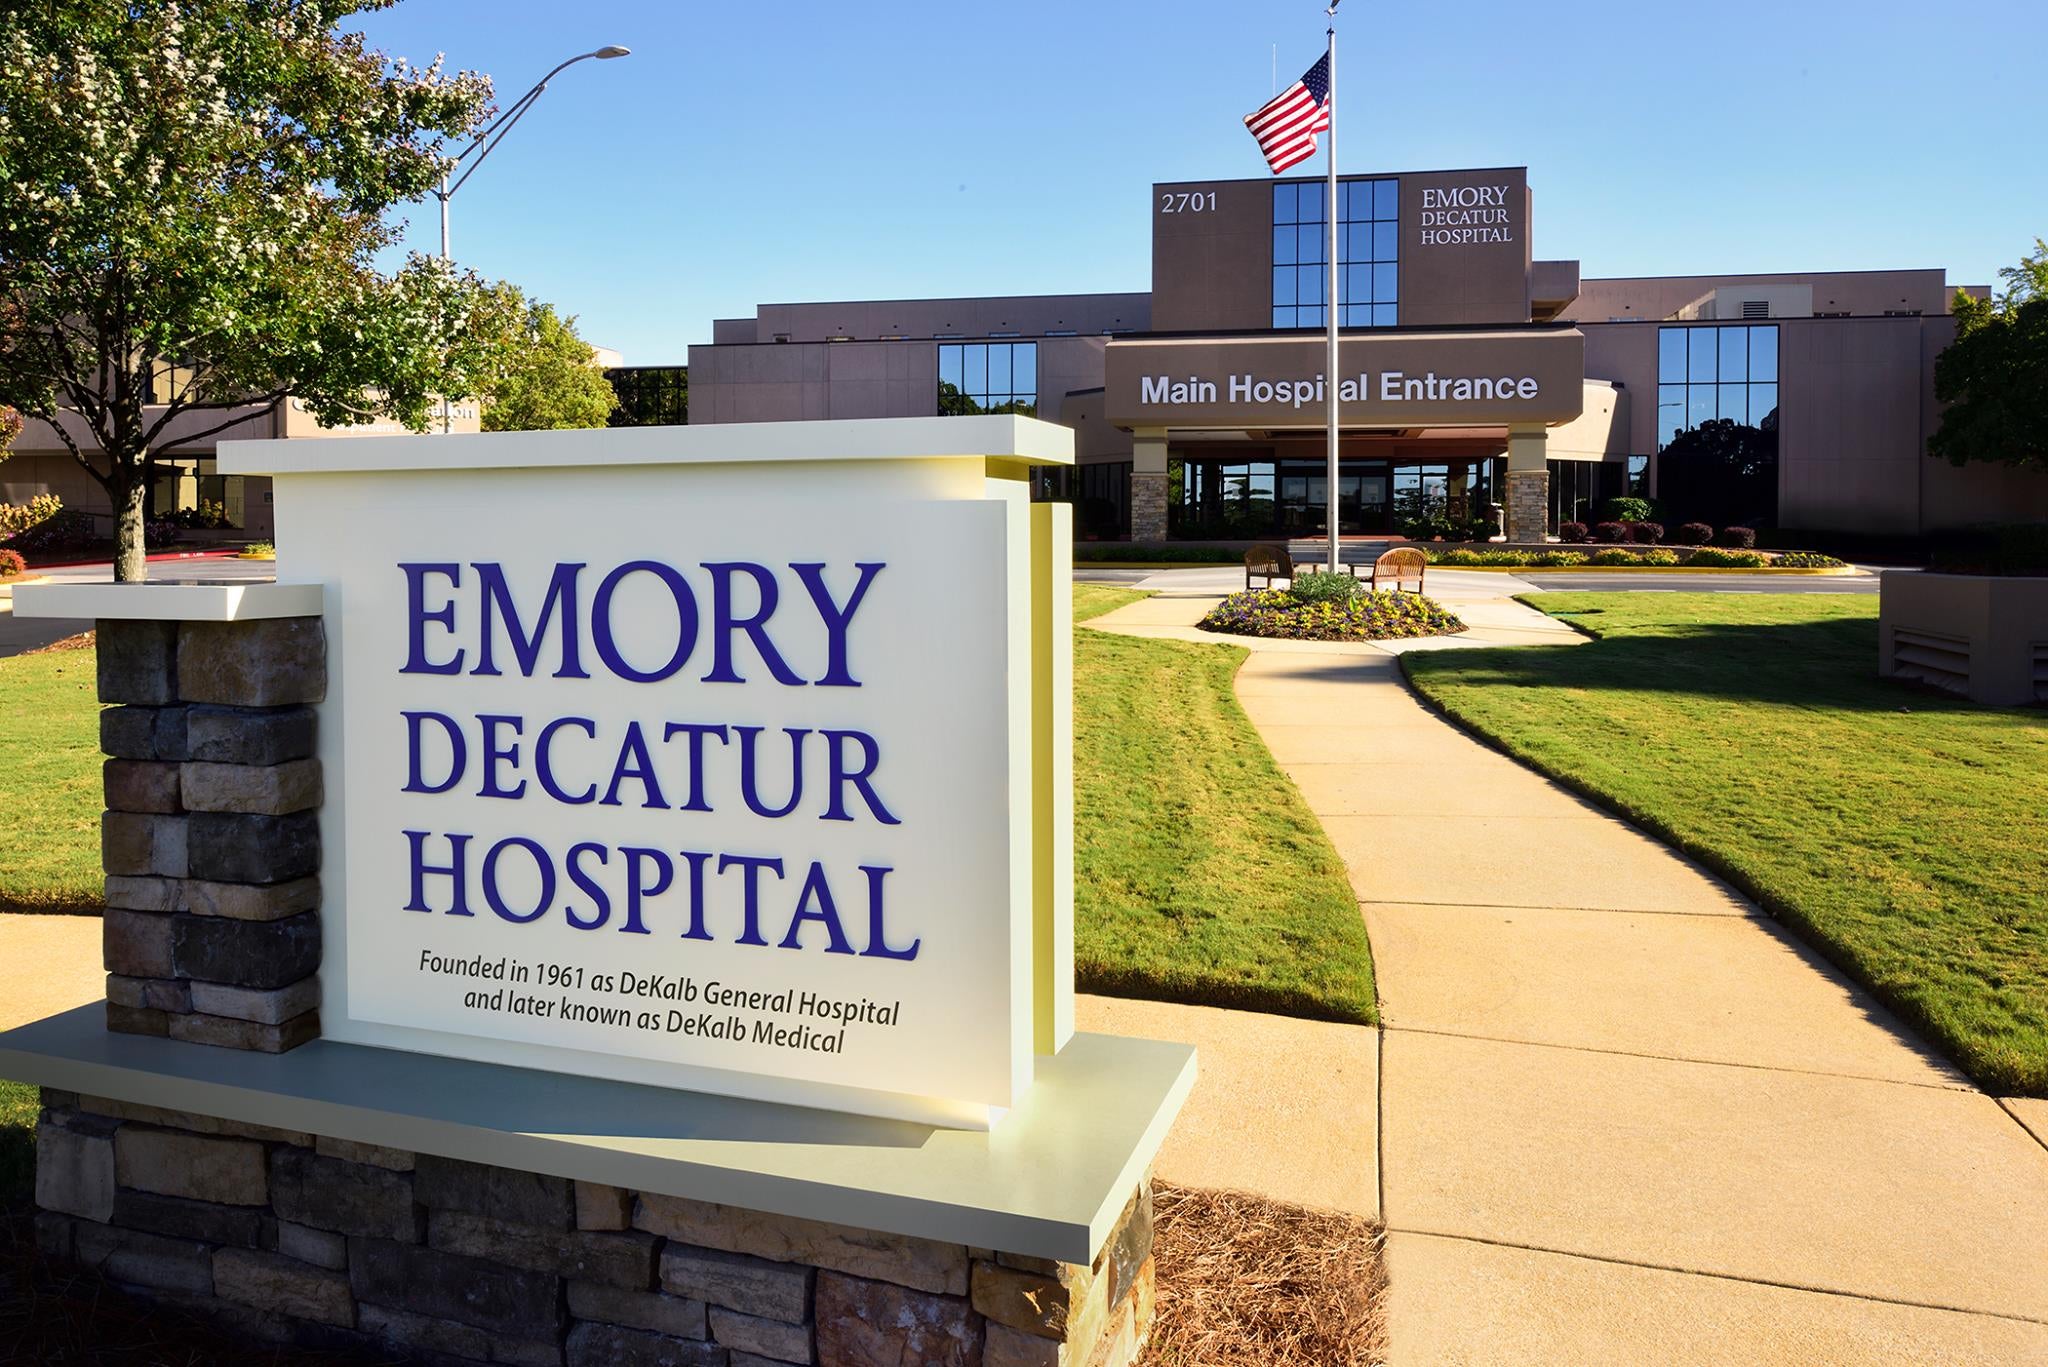 A woman says she was charged nearly $700 for waiting in an emergency room at Atlanta’s Emory Decatur hospital for seven hours, only to return without treatment